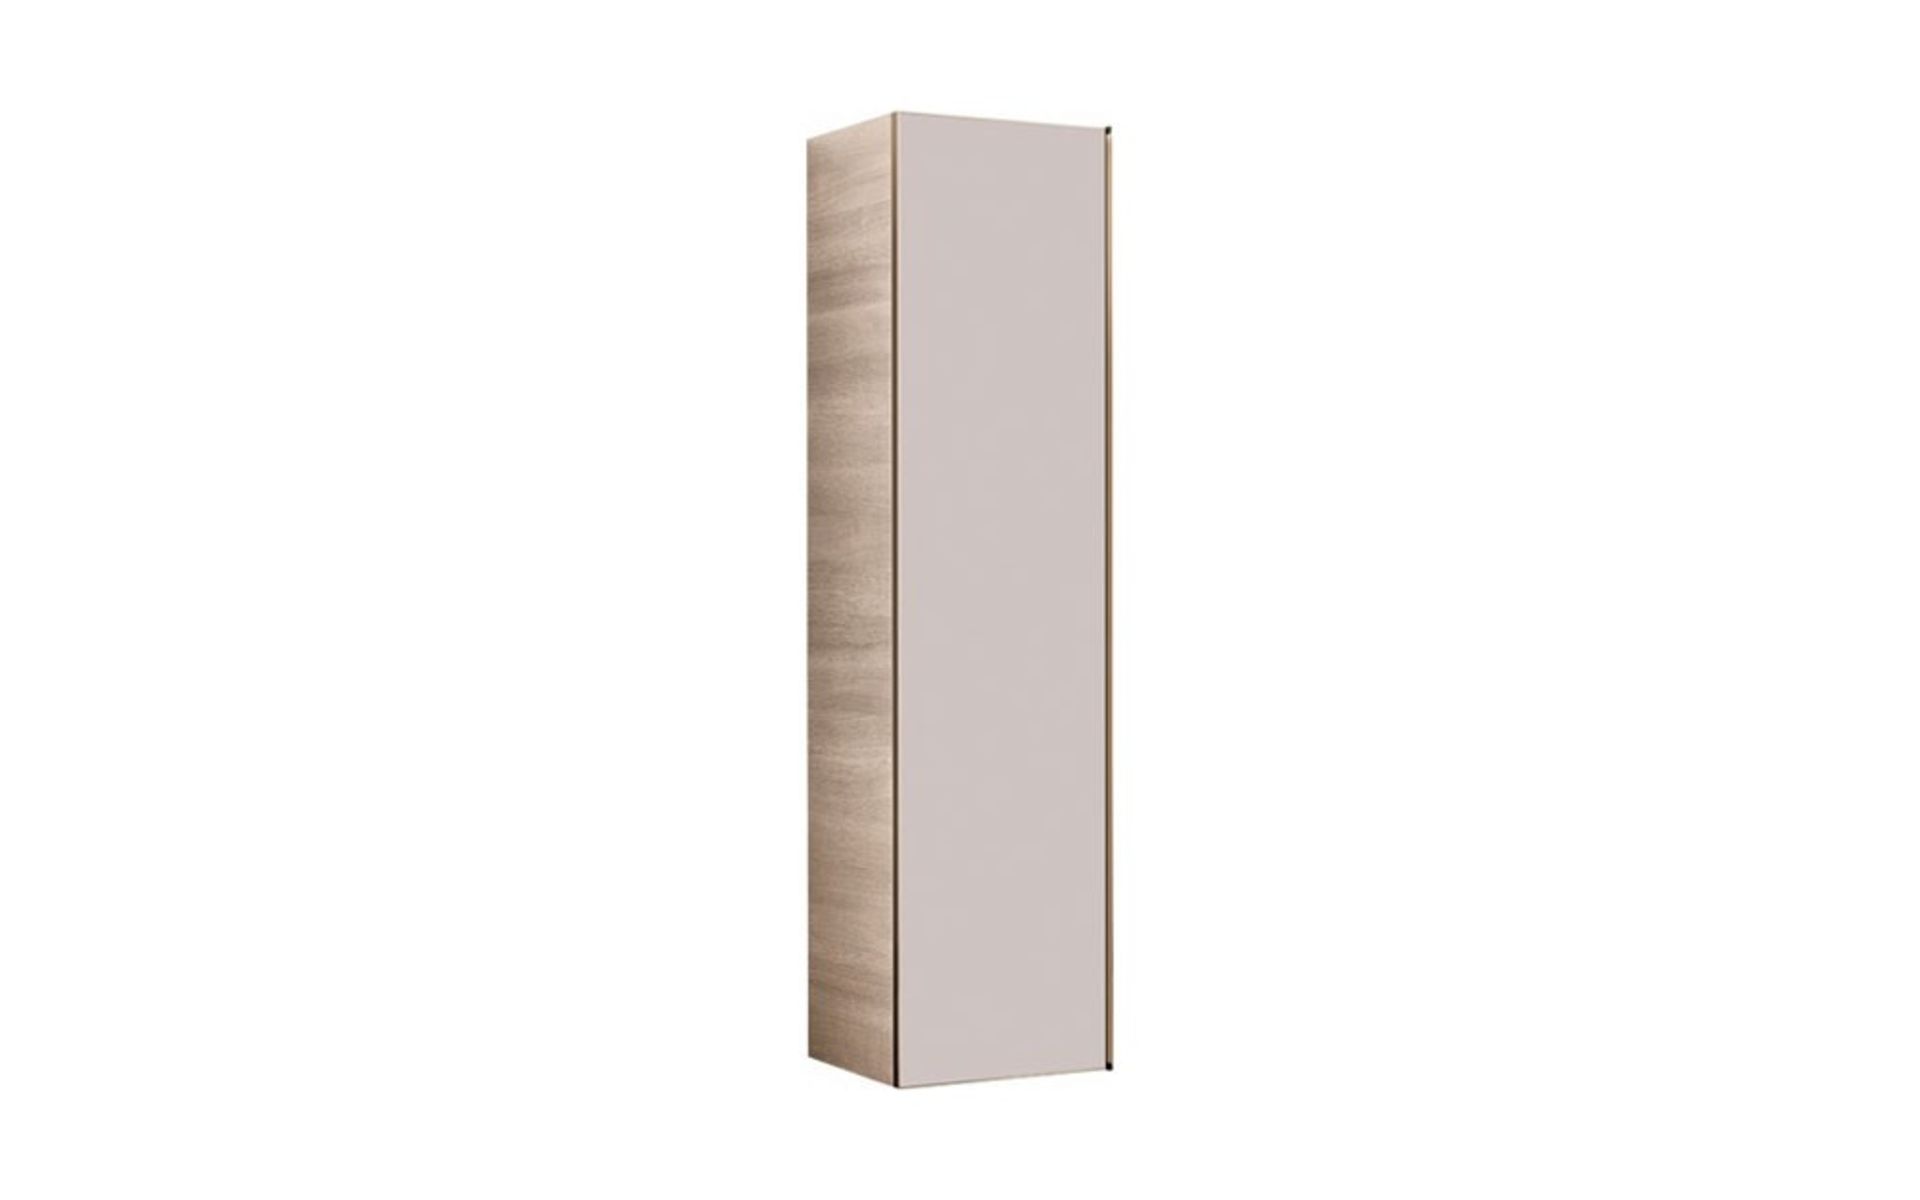 (XL139) Keramag Citterio Tall Cabinet 400x1600x371mm. RRP £899.99. Wood Structure Oak Tranche ...( - Image 3 of 3